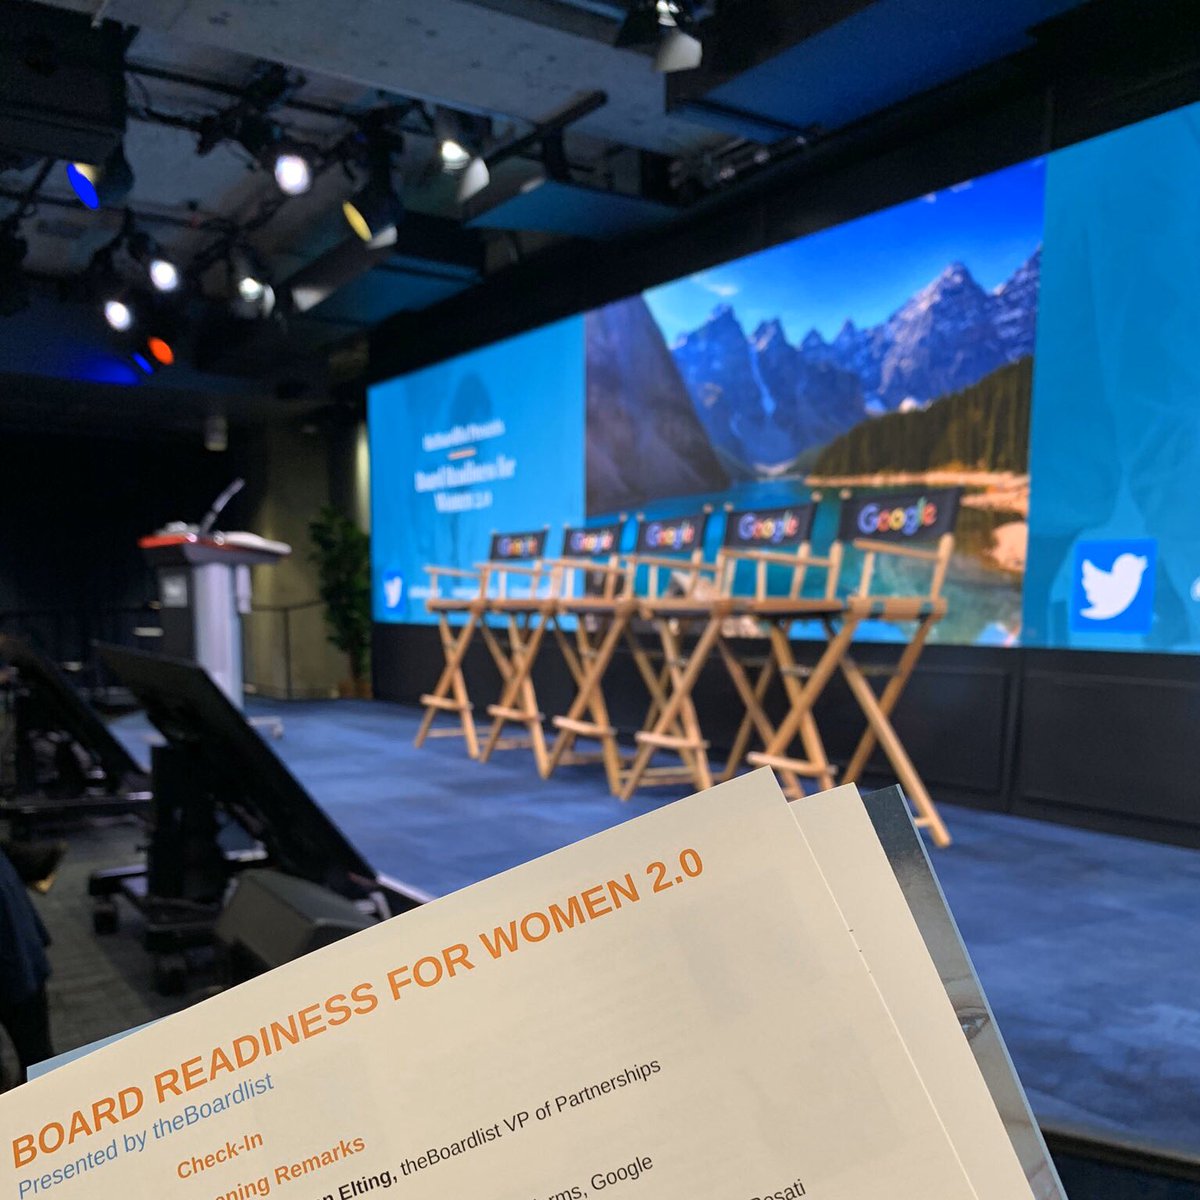 Spending my day at @theboardlist Board Readiness for Women event, with 150+ other women from different industries to discuss #WomenOnBoards, increasing #genderdiversity on corporate boards. Currently, 90% of boards are male directed. Let's improve that ratio. #ChoosePossibility